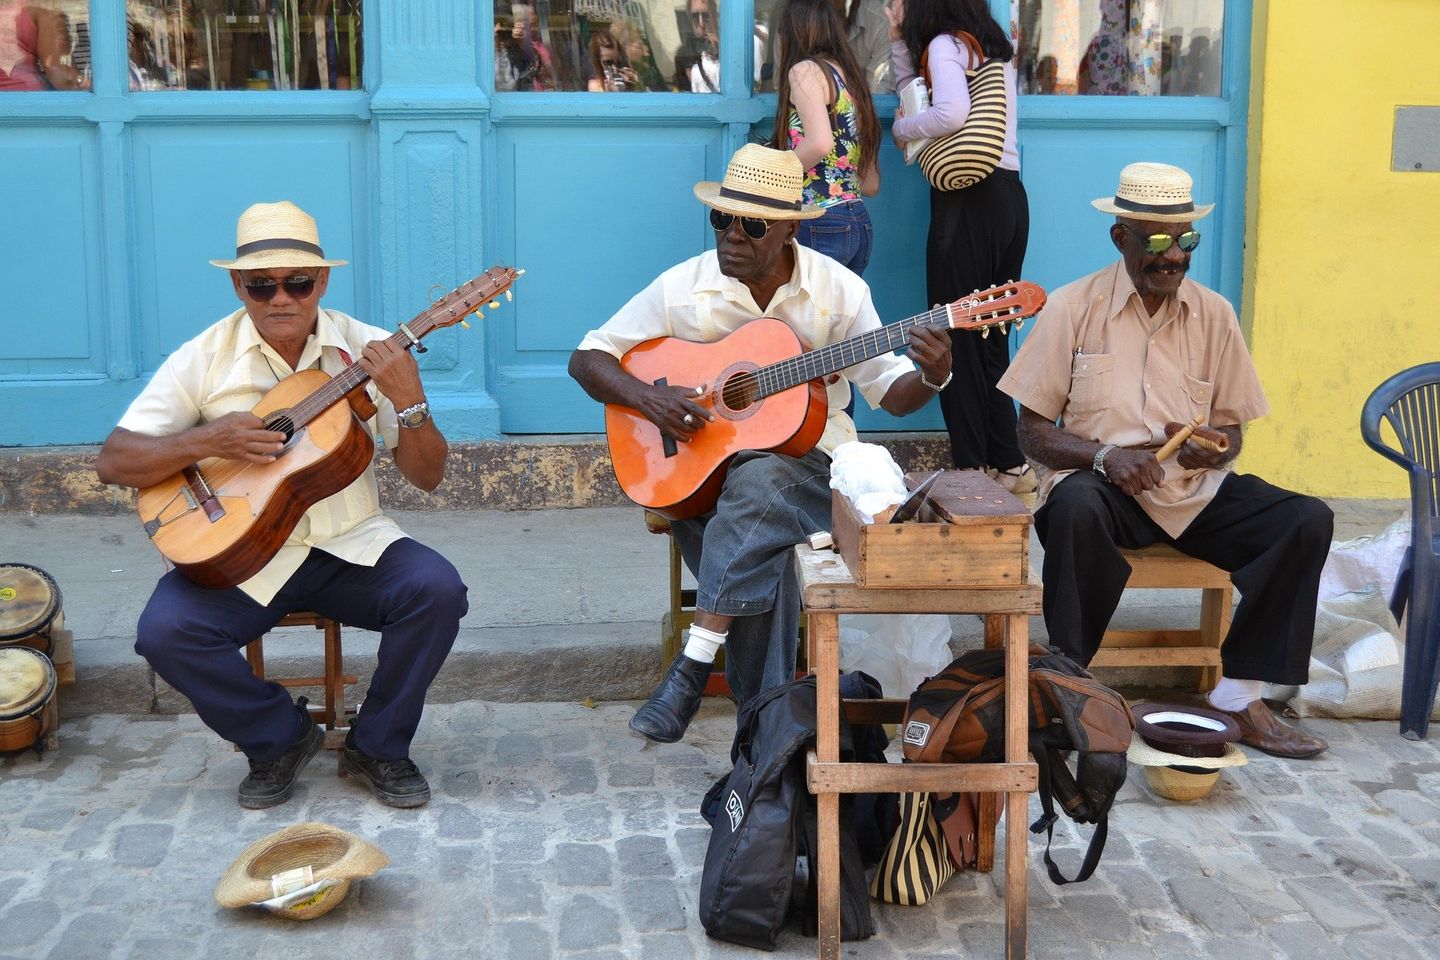 Locals playing guitar and instruments